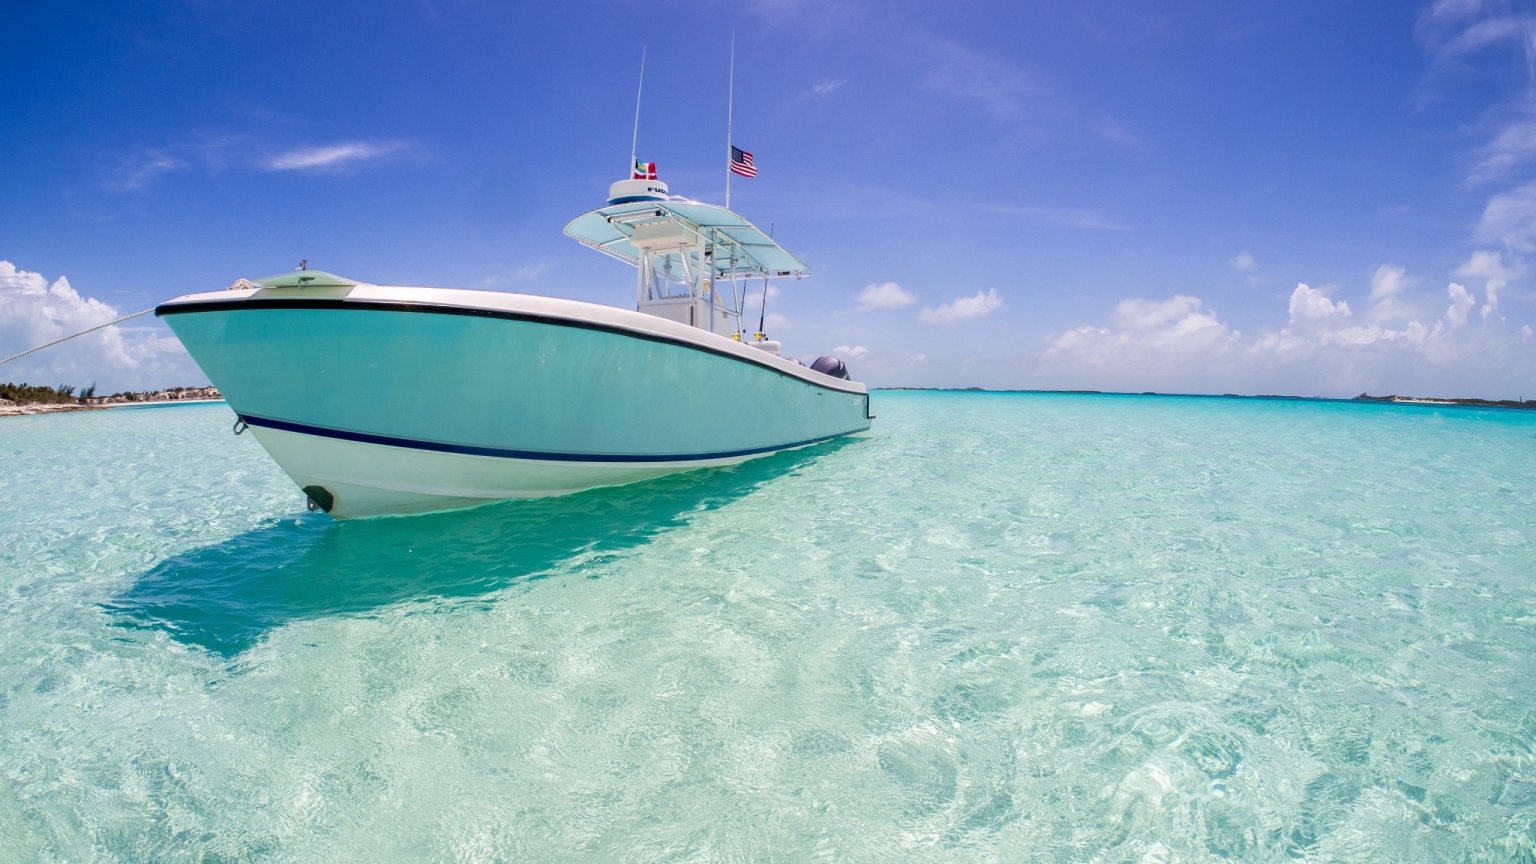 Boat in Paradise for 1536 x 864 HDTV resolution